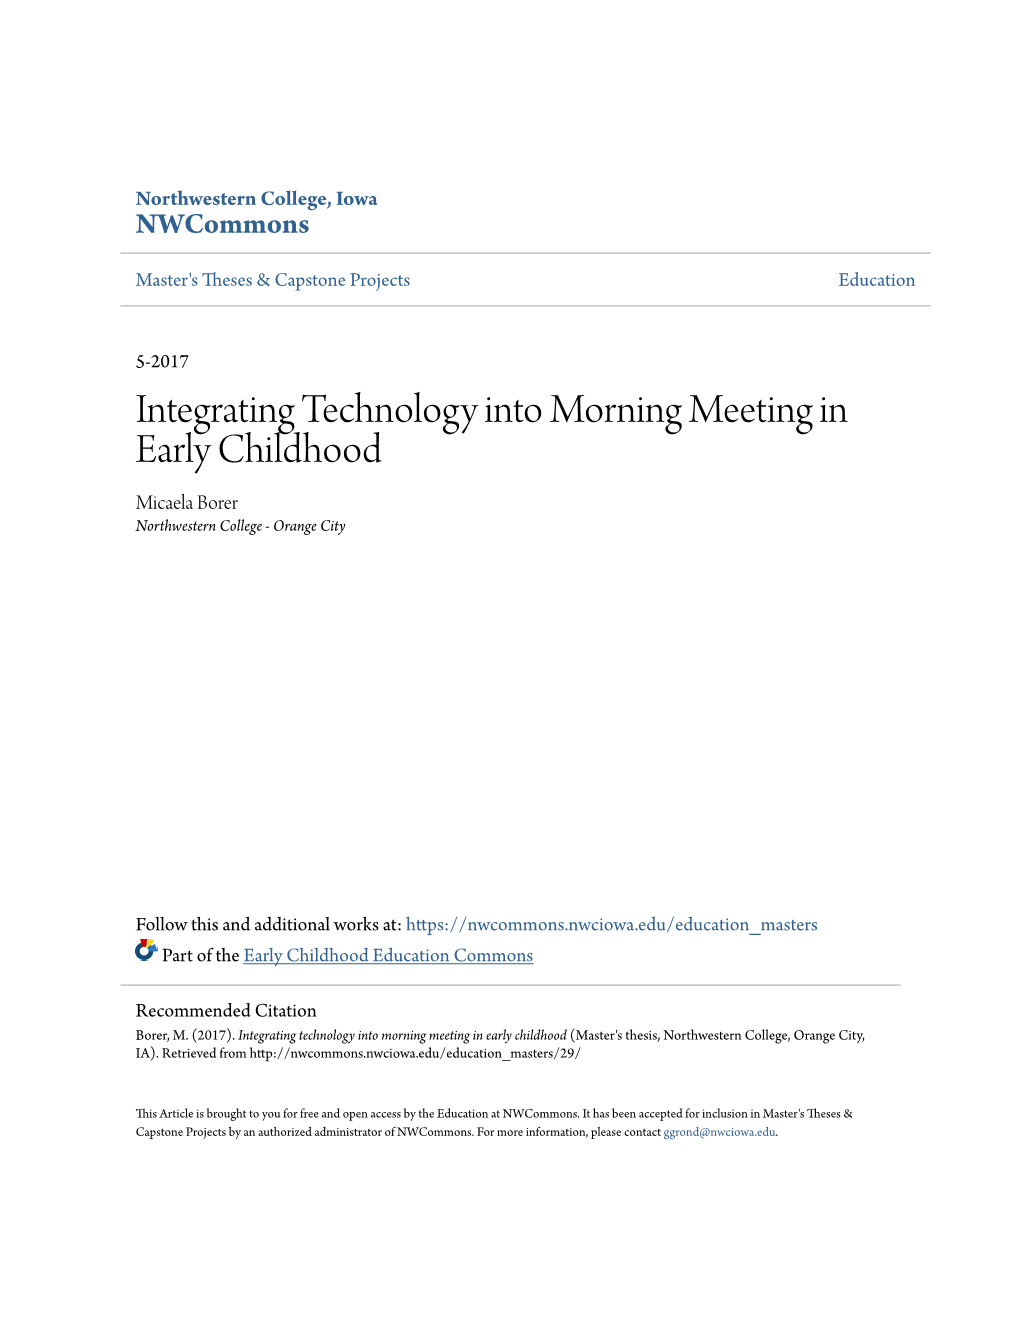 Integrating Technology Into Morning Meeting in Early Childhood Micaela Borer Northwestern College - Orange City